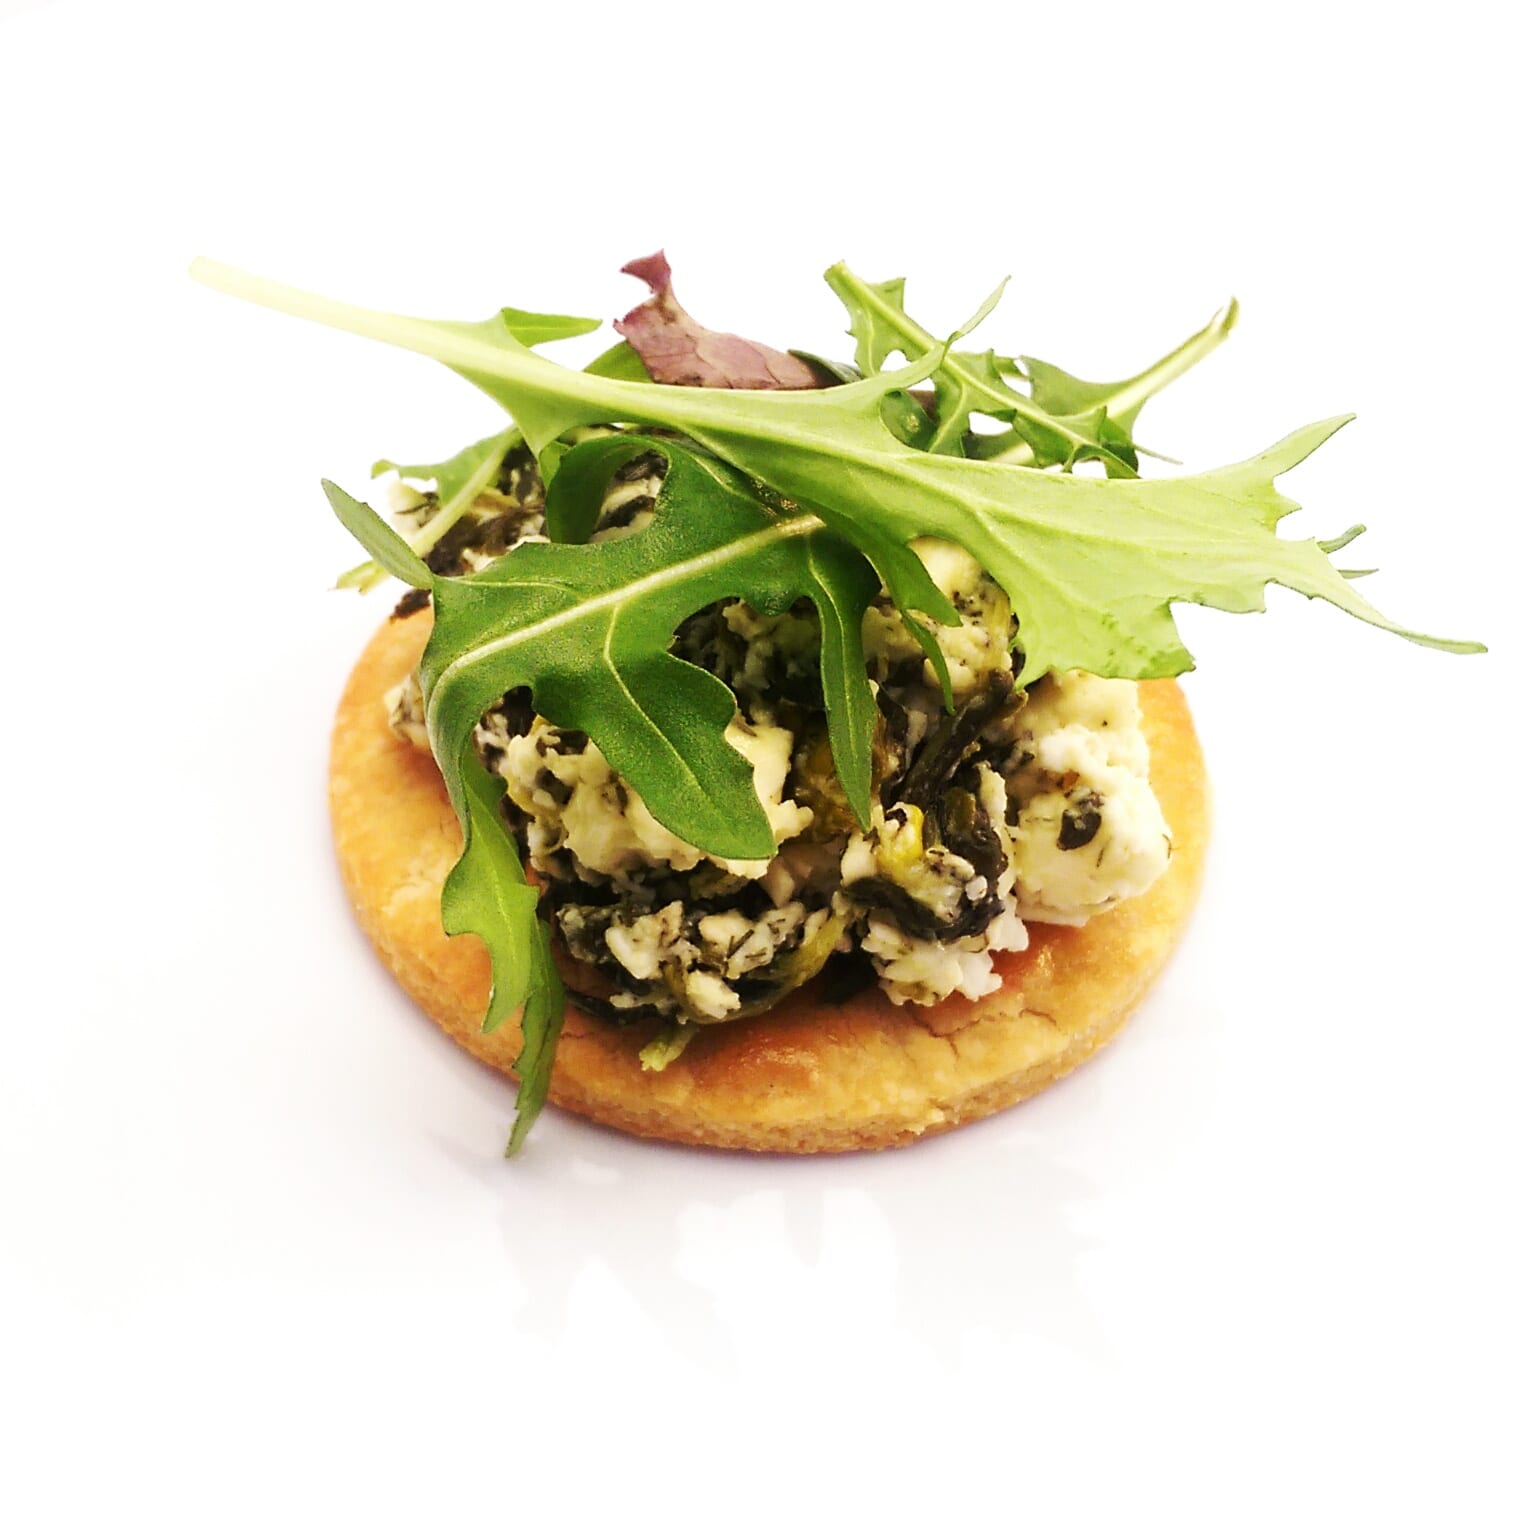 pastry disk with feta and spinach filling on top covered with salad